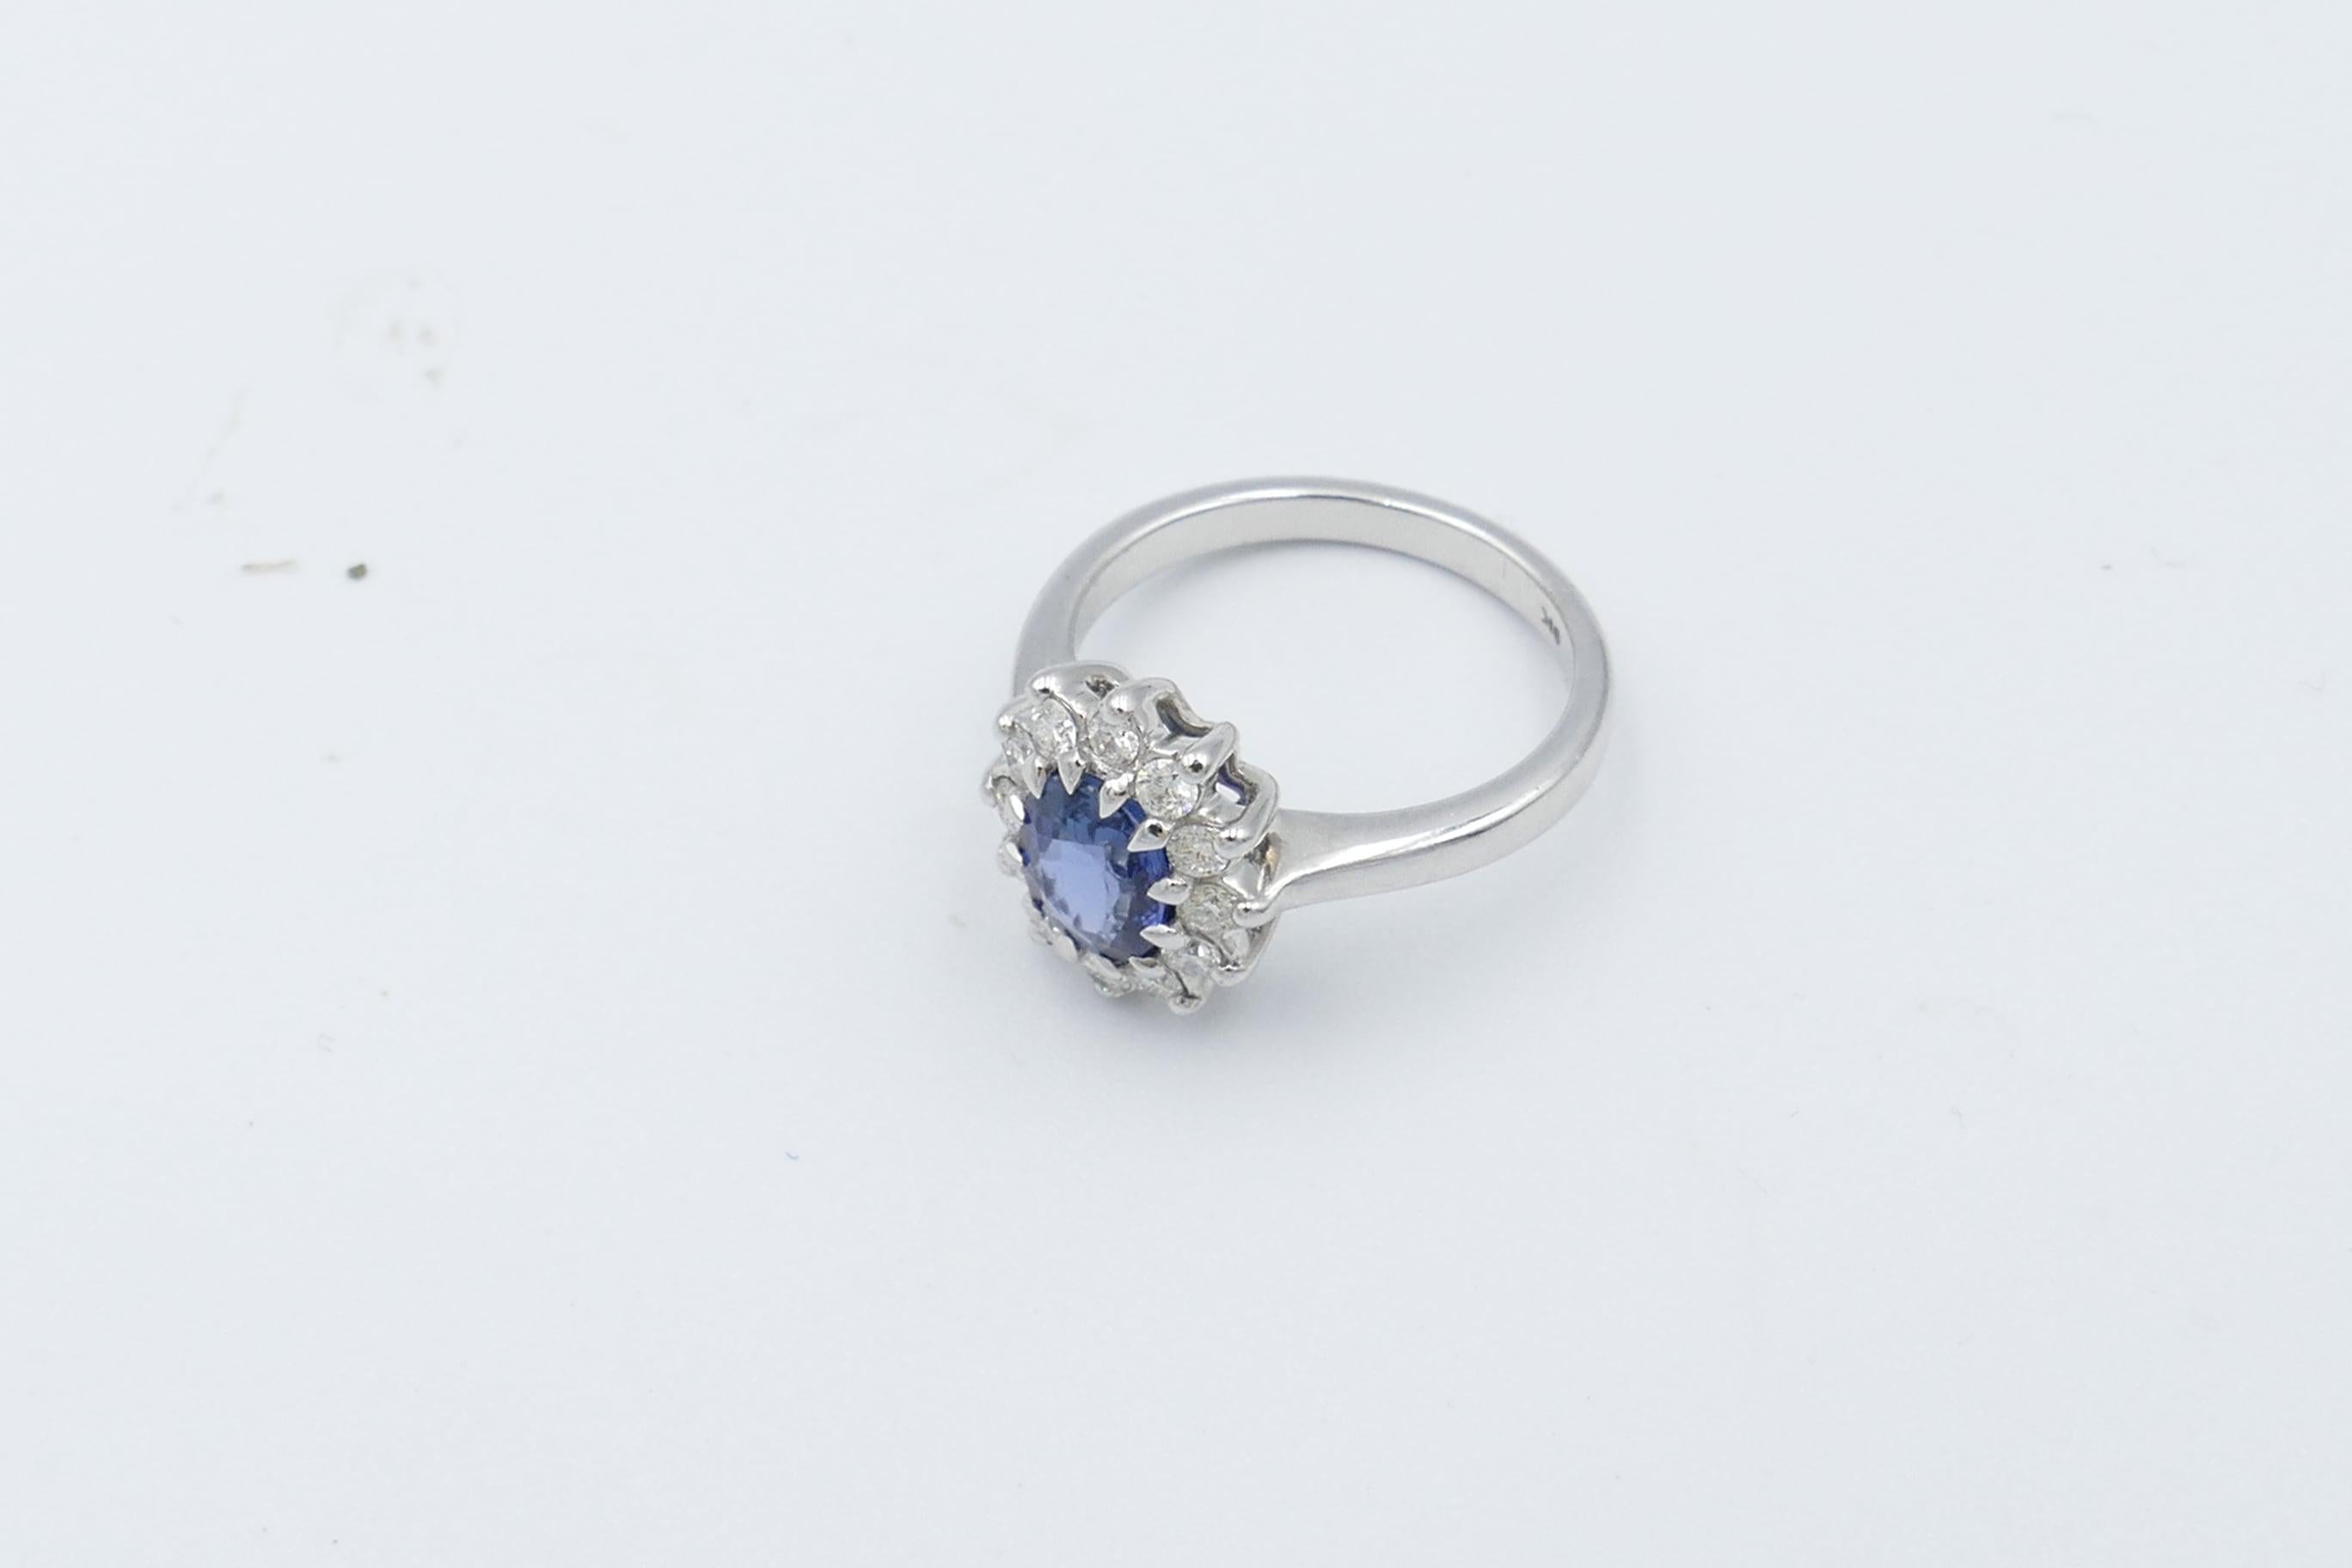 Exceptional White Gold Sapphire and Diamond Engagement or Dress Ring In New Condition For Sale In Splitter's Creek, NSW